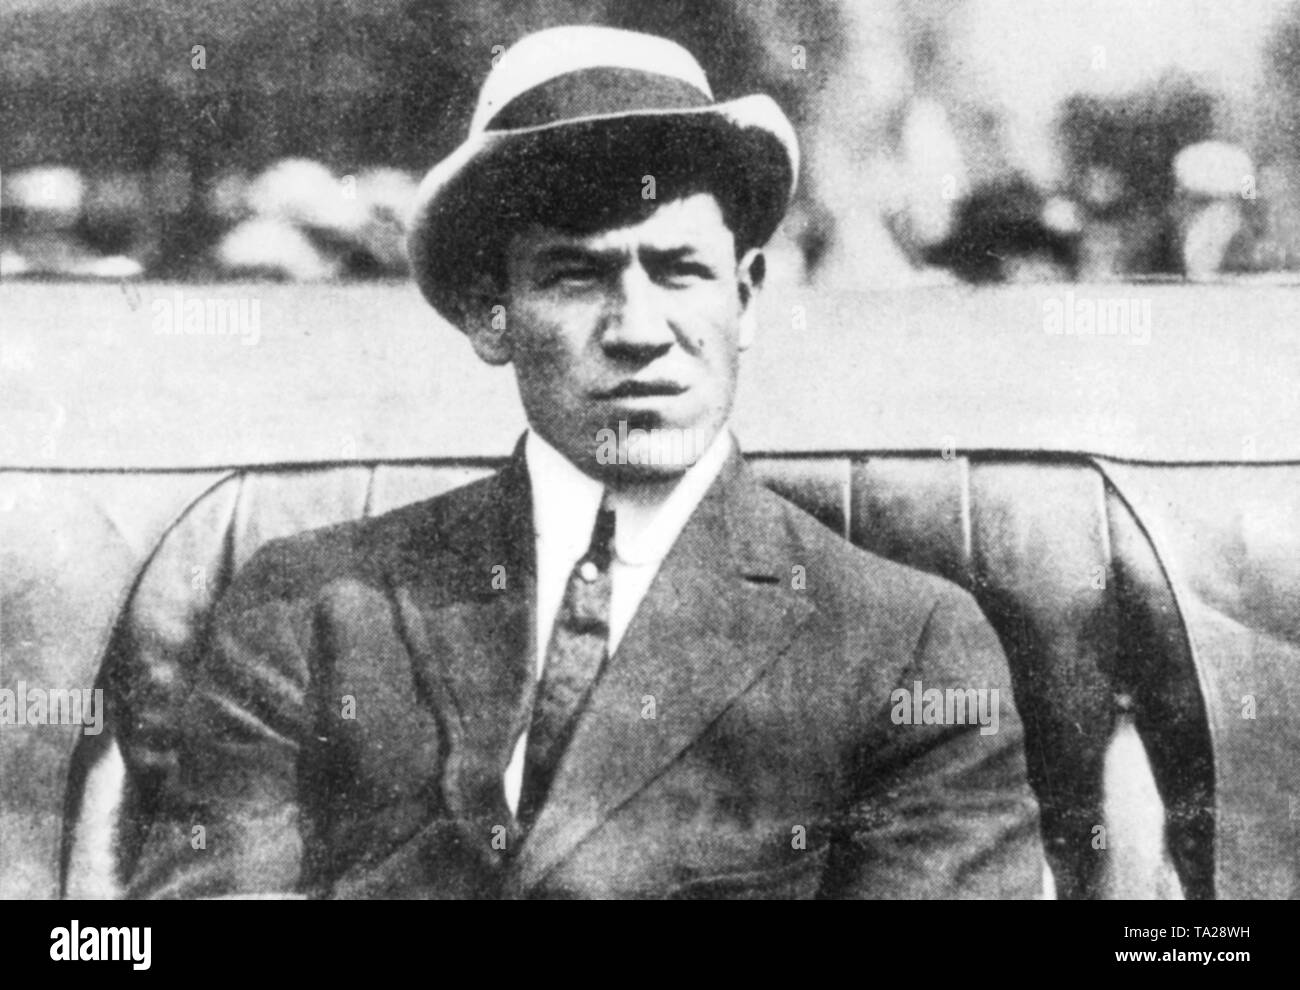 Jim Thorpe (1988-1953), a US athlete, won gold medals in the pentathlon and decathlon at the 1912 Olympic Games in Stockholm. Thorpe was also a successful football and baseball player in his homeland America. Undated photo, presumably from the 1910s. Stock Photo